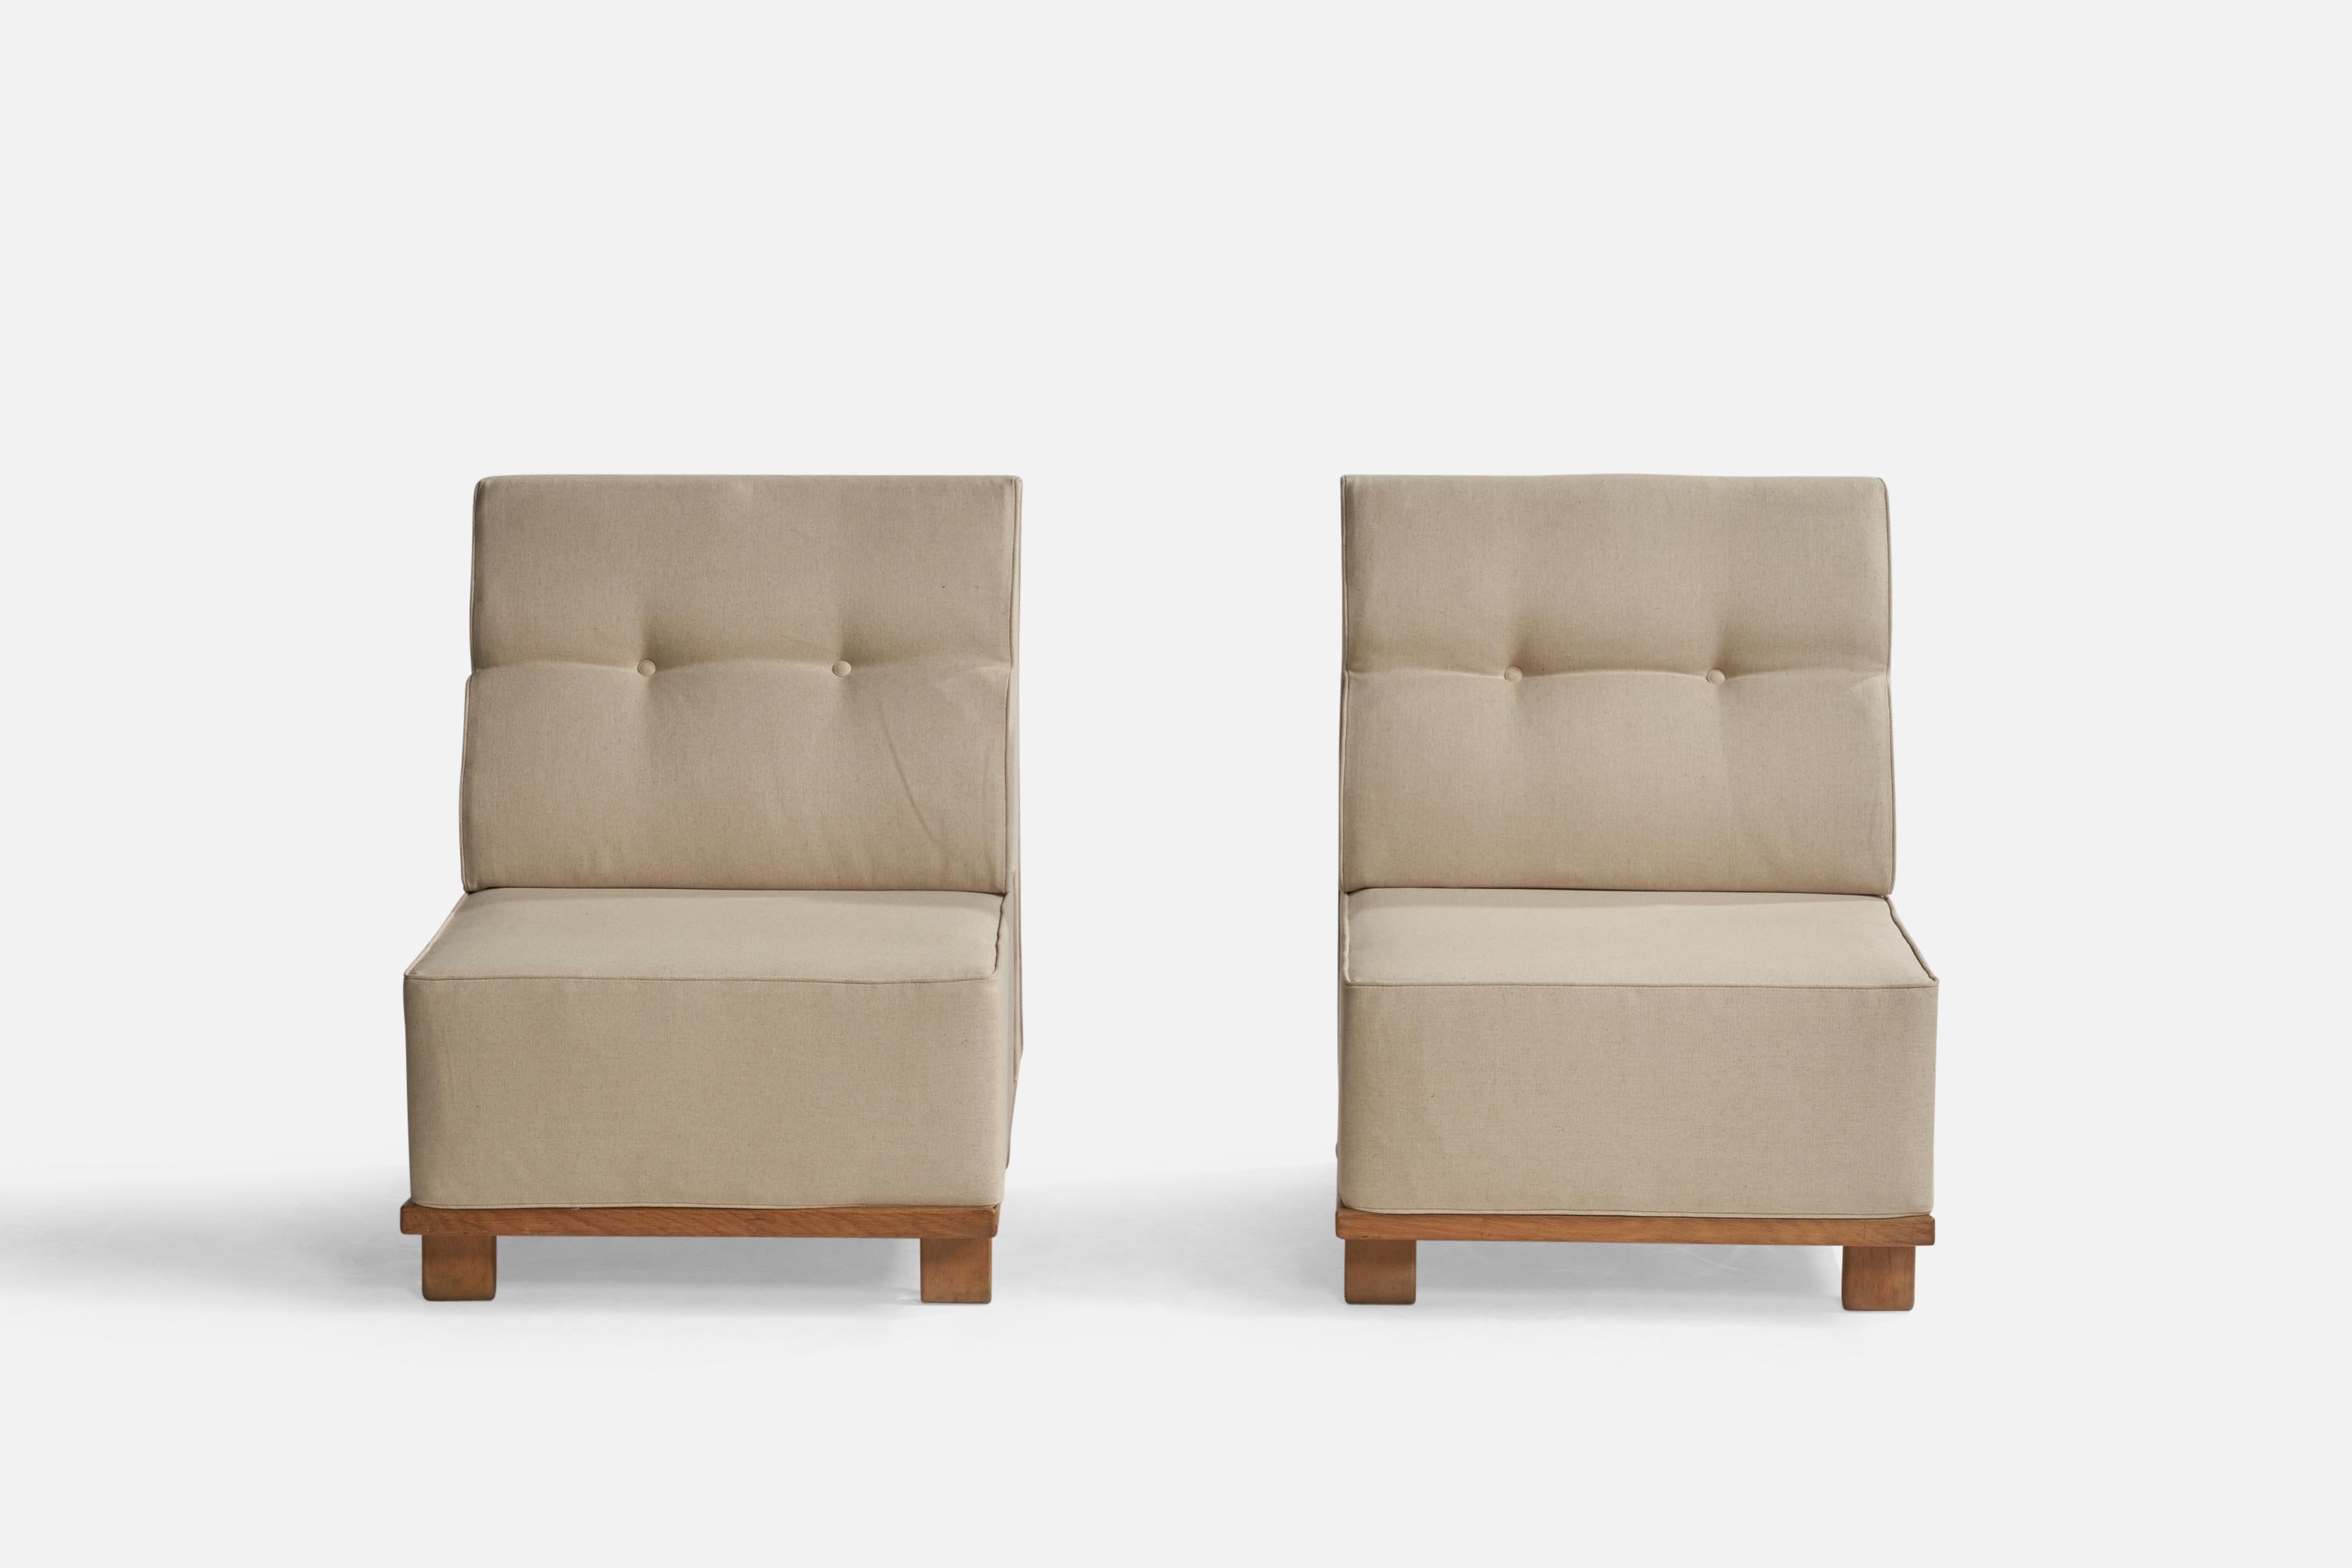 Mid-Century Modern Guillerme & Chambron, Lounge Chairs, Fabric, Oak, France, 1950s For Sale